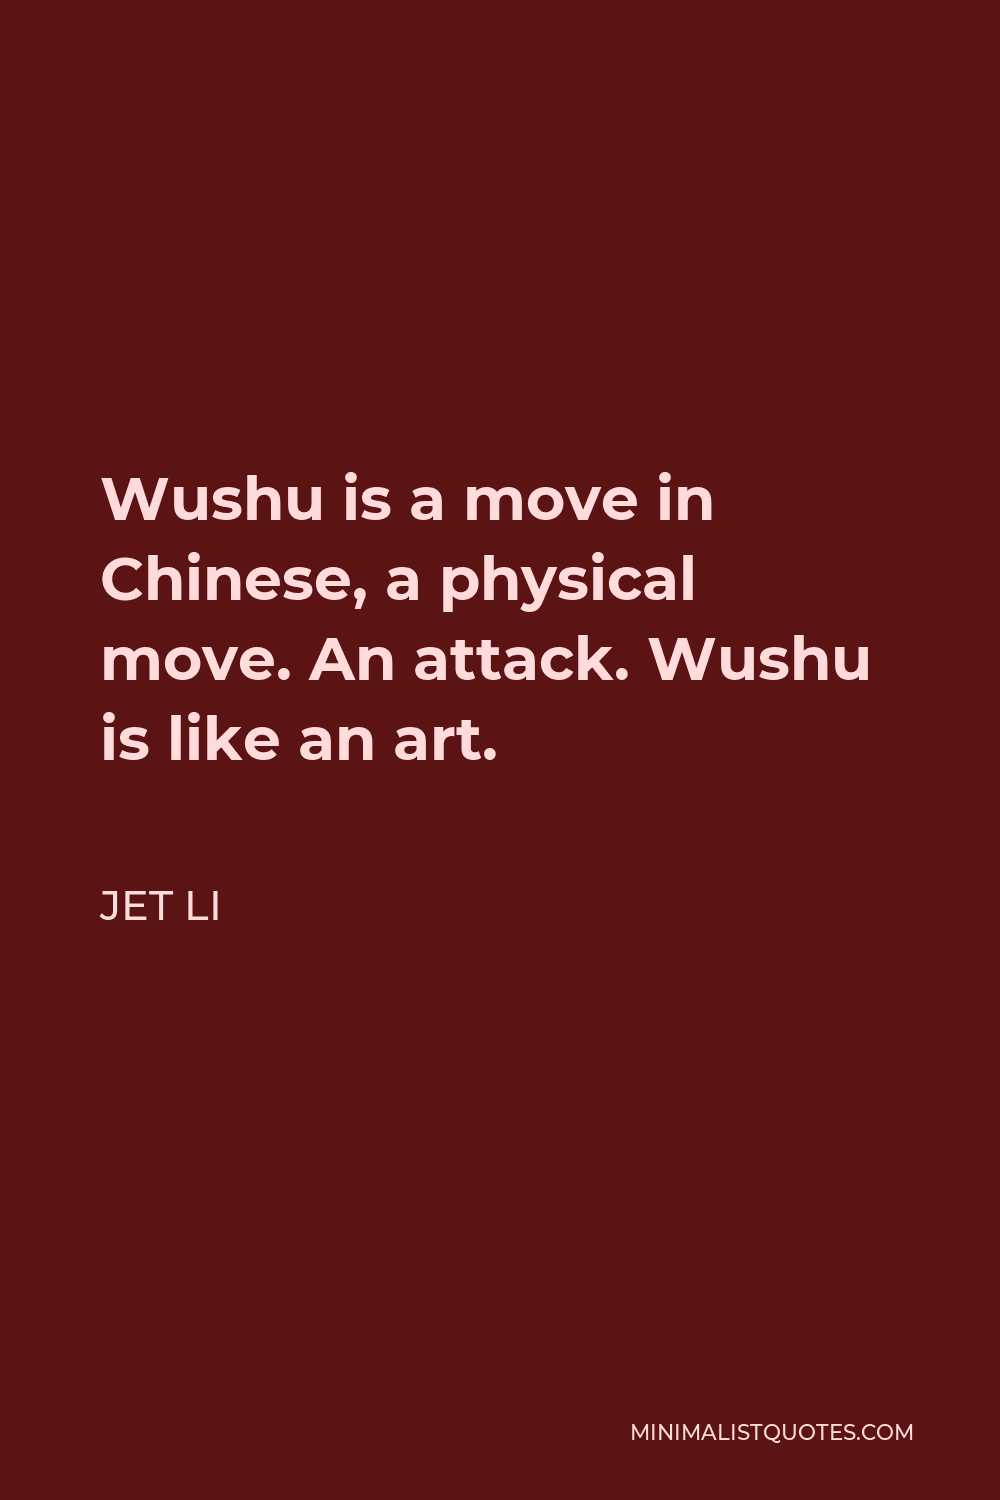 Jet Li Quote - Wushu is a move in Chinese, a physical move. An attack. Wushu is like an art.